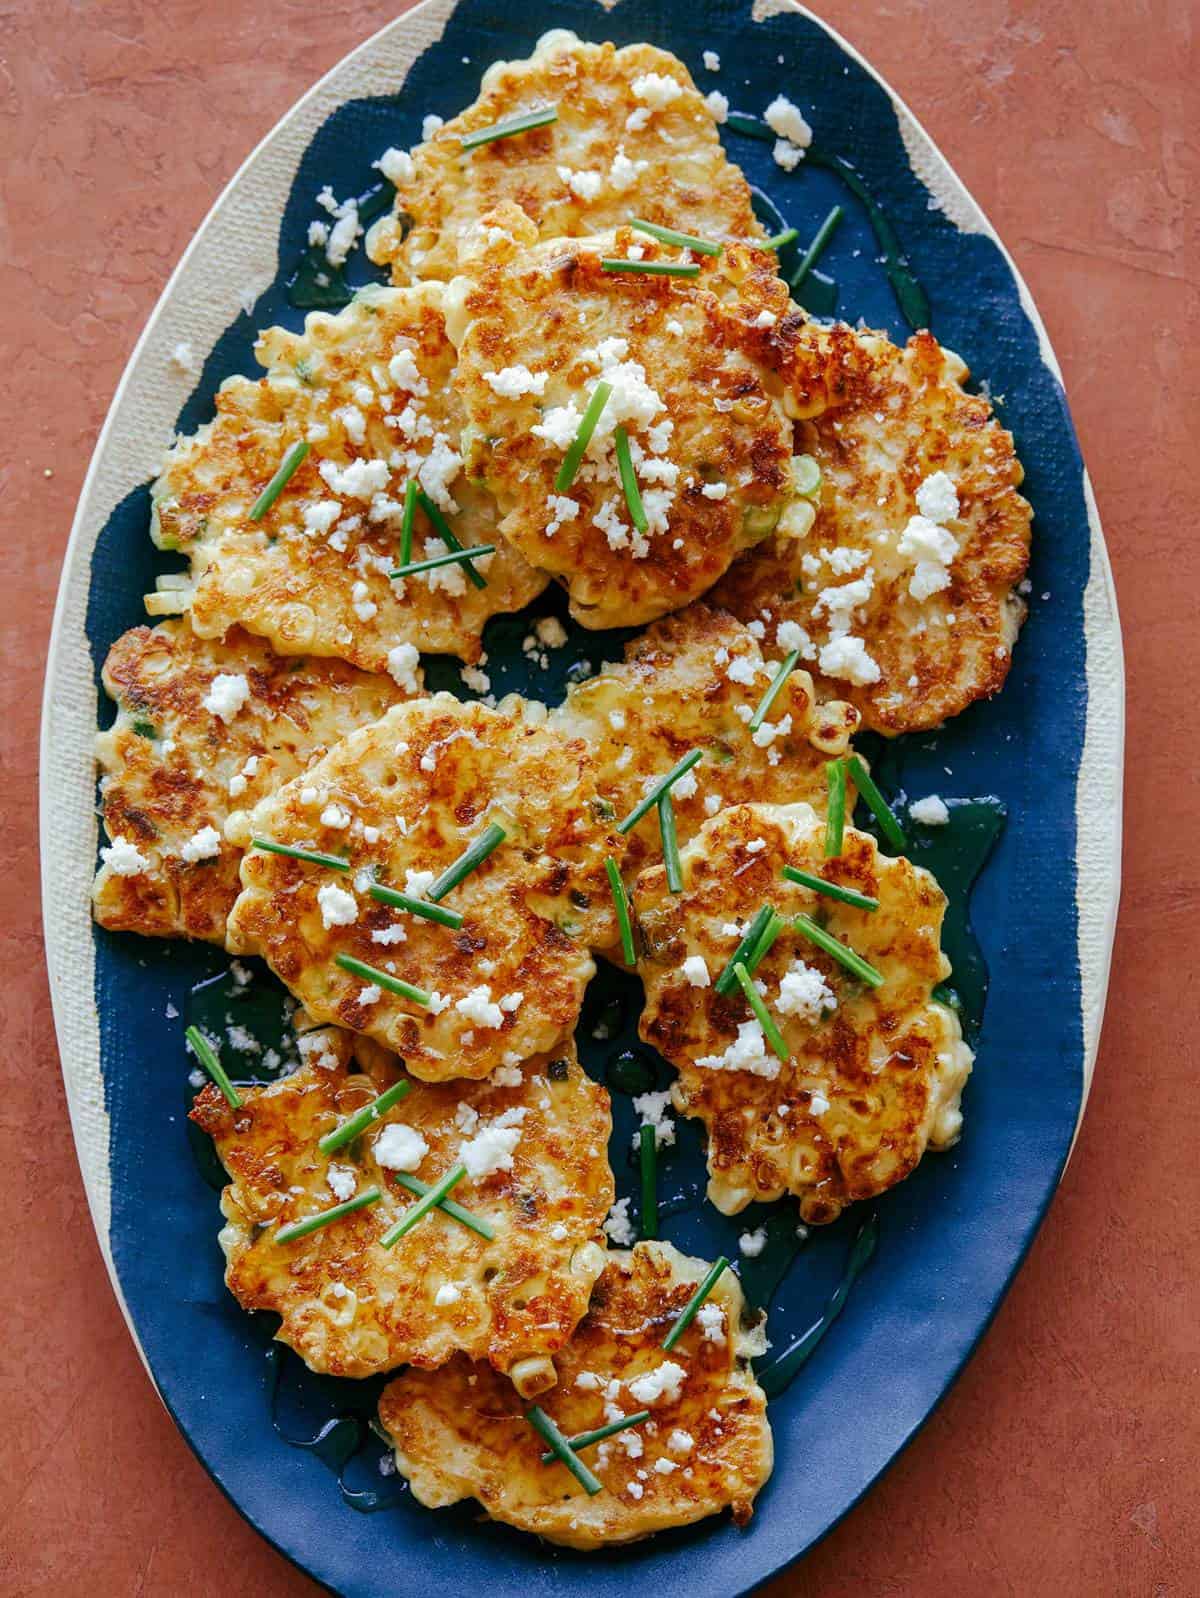 Baked Corn Fritters - A healthier option - Beautiful Voyager